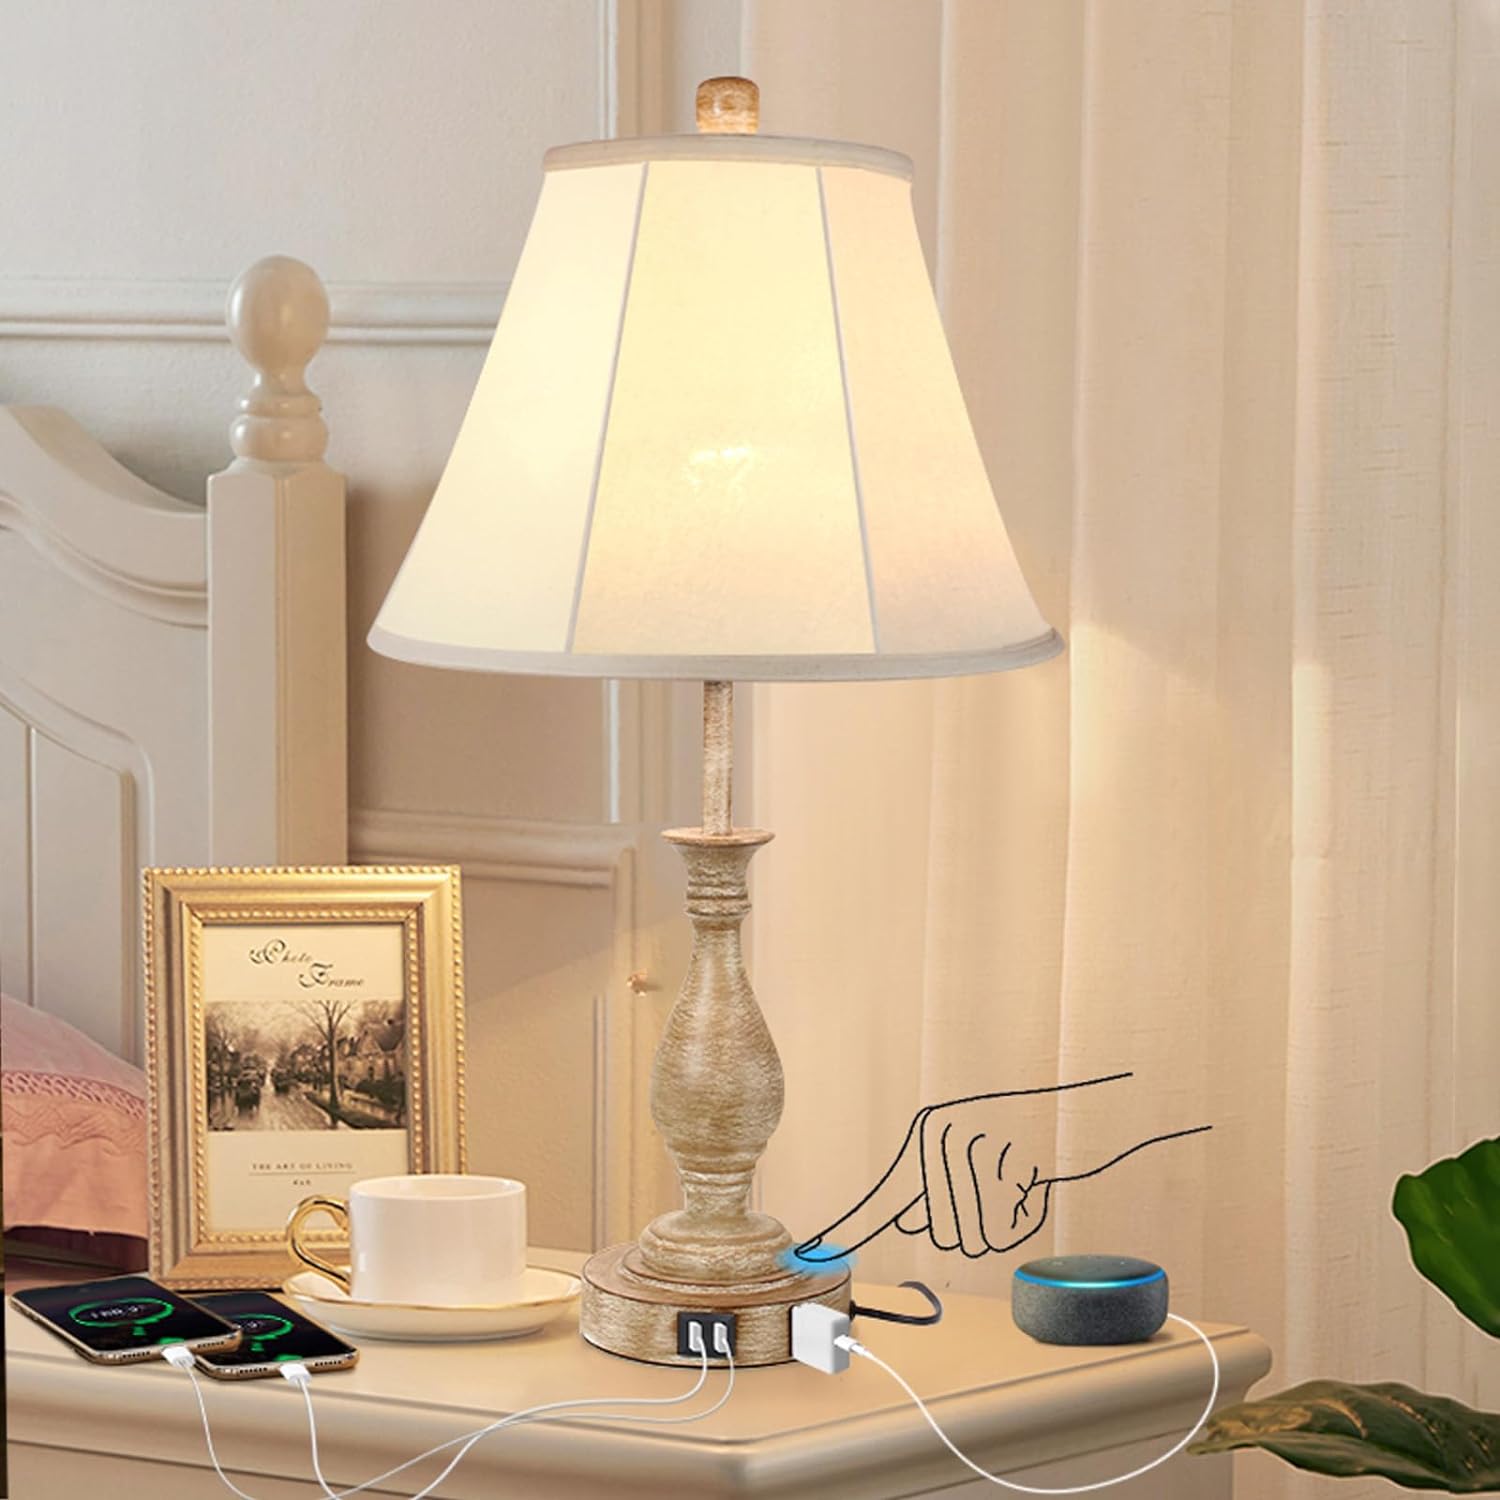 Farmhouse Table Lamp Touch Control 3-Way Dimmable, Modern Nightstand Lamp with 2 USB Port Bedside Desk Lamp with Fabric Shade for Living Room Bedroom Hotel (Pack-01)